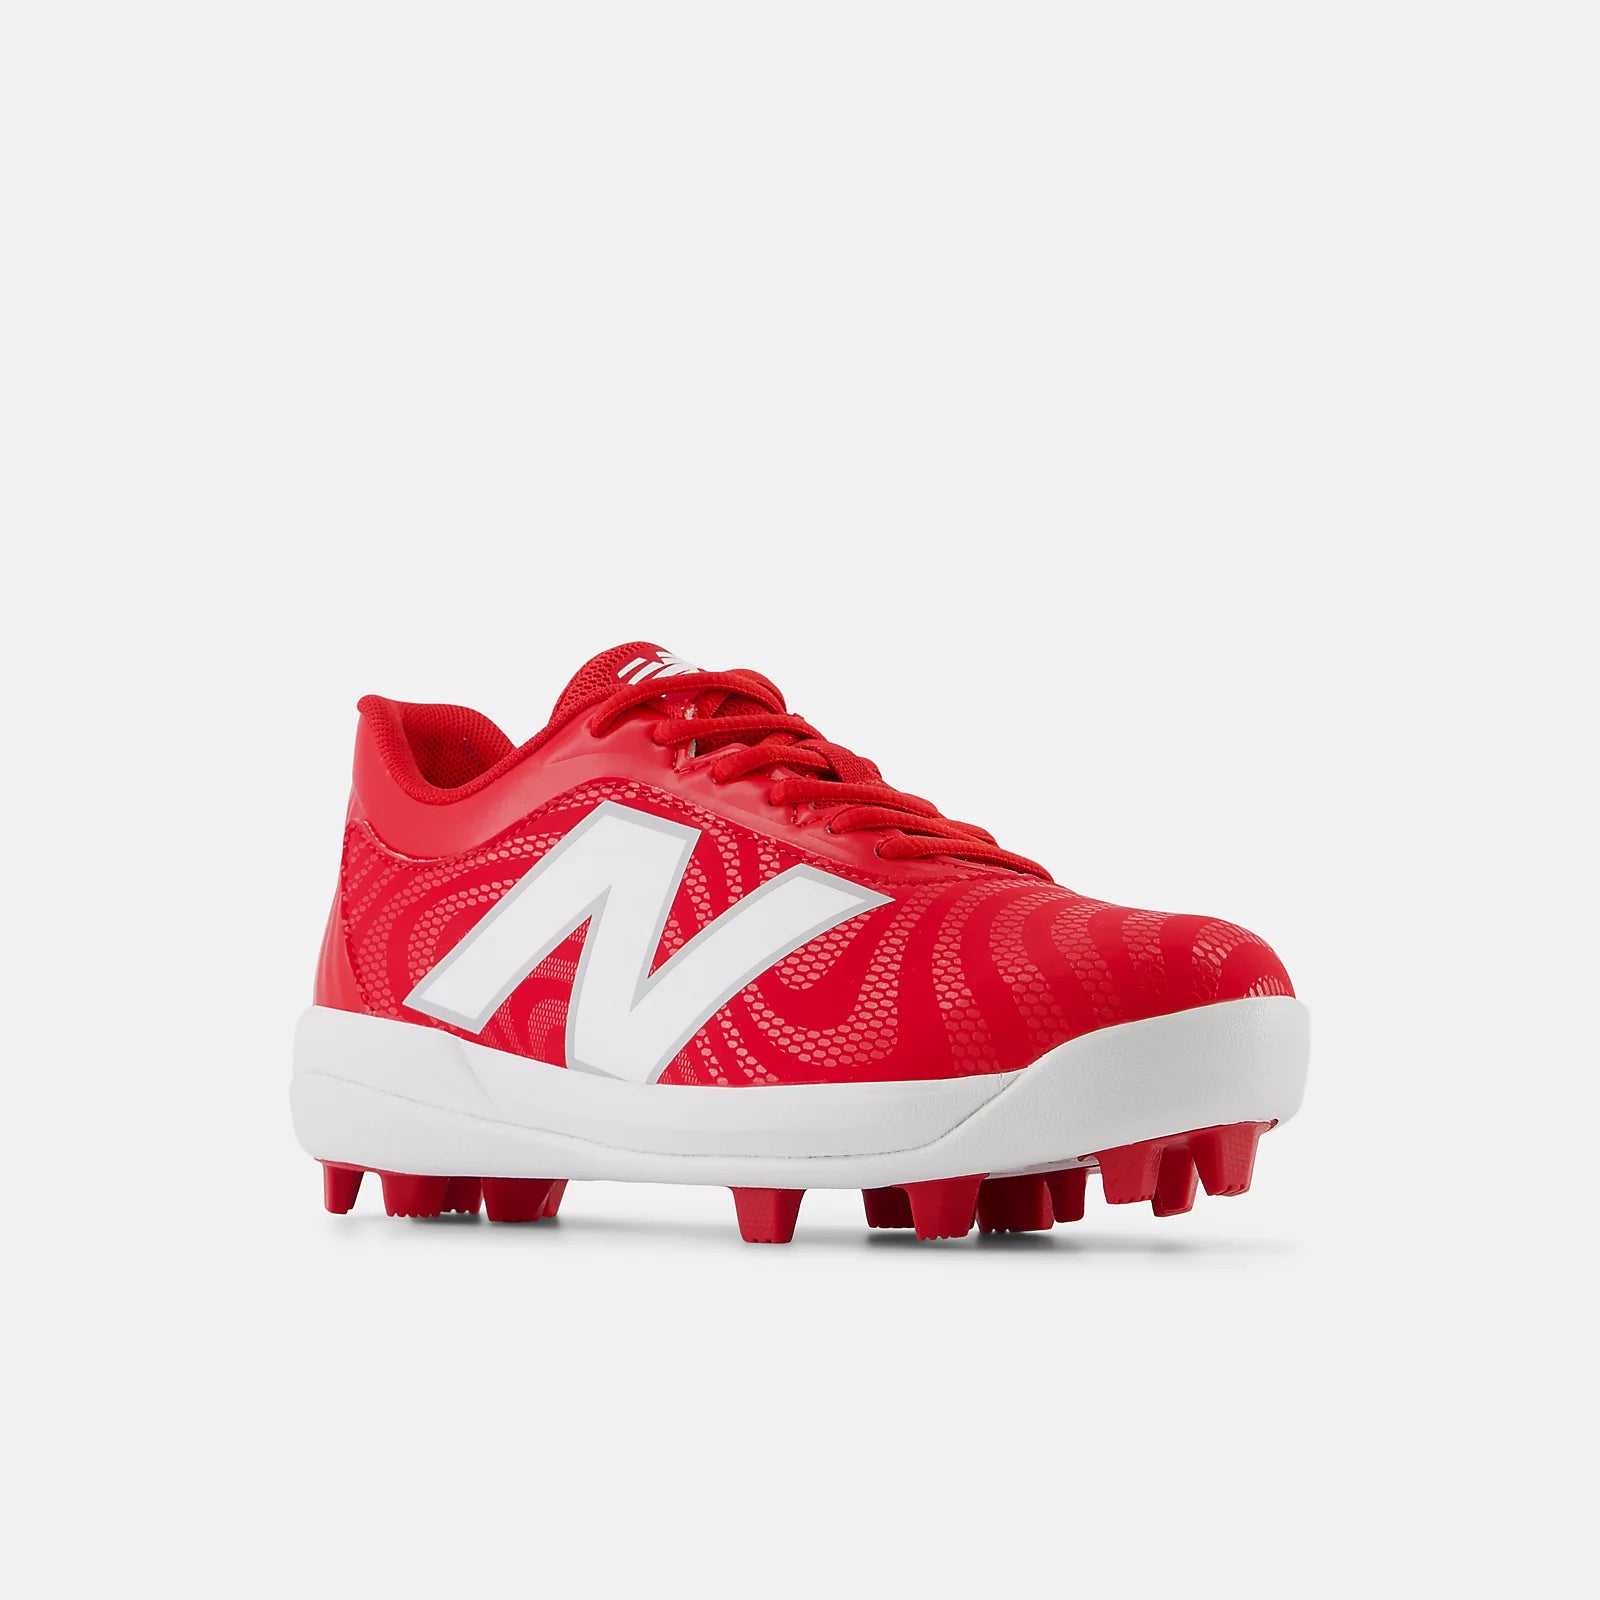 New Balance 4040v7 Youth Rubber-Molded: Team Red